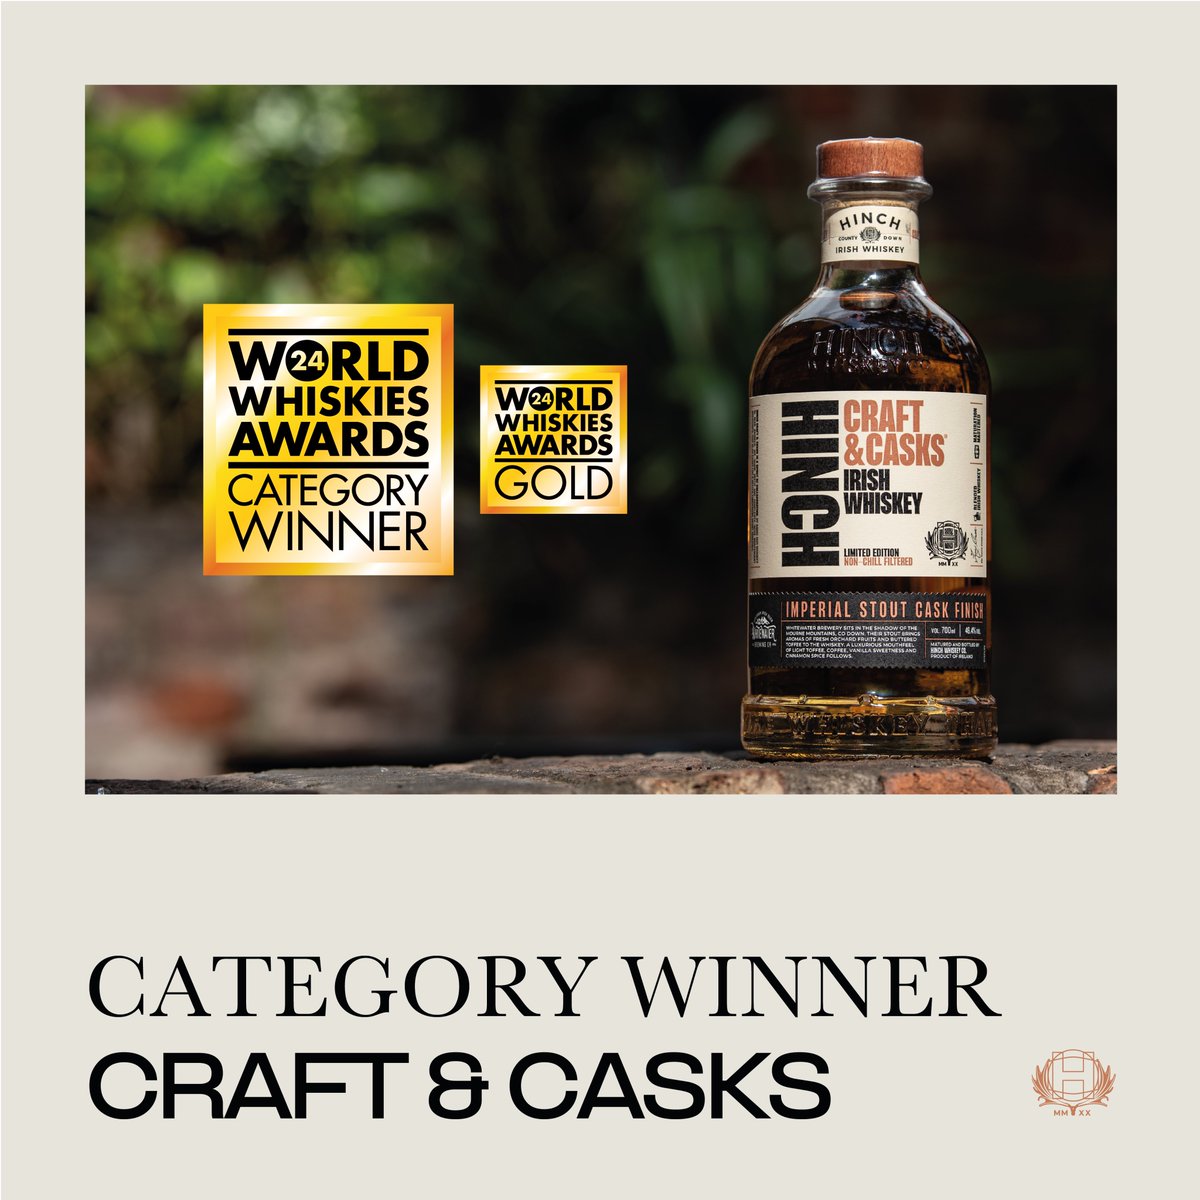 Our Craft & Casks Imperial Stout Finish and 5 Year Old Double Wood have both struck gold at this year's World Whiskies Awards, each winning category winner and gold. Double Delight! #WorldWhiskiesAwards #Awards #HinchWhiskey #Whiskey